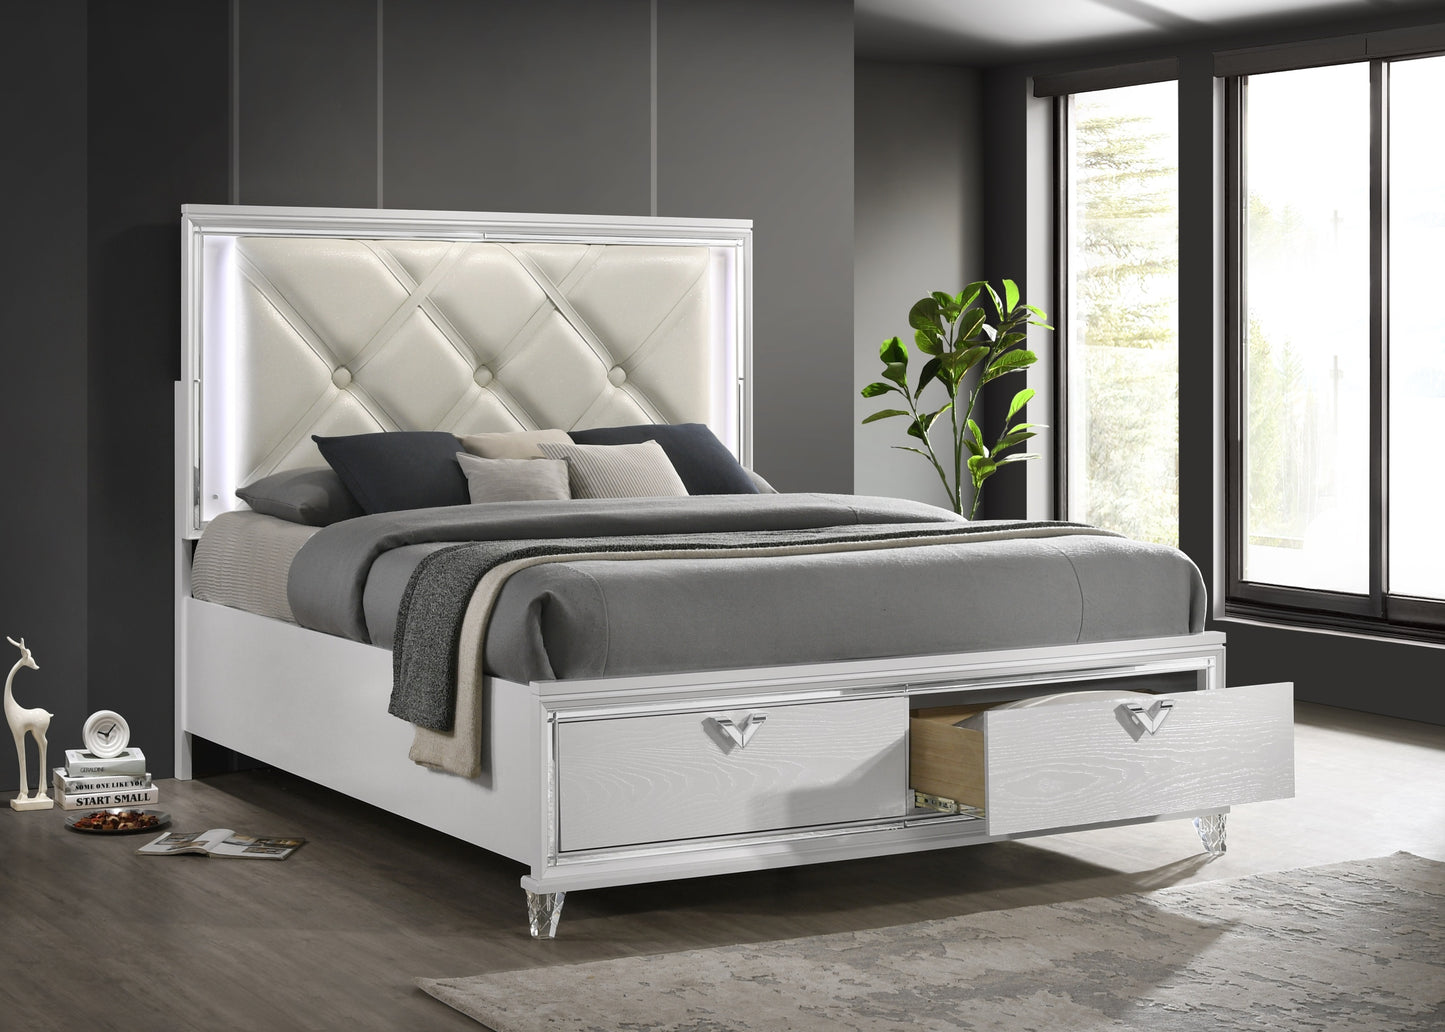 Prism Modern Style King 5PC  Bedroom Set with LED Accents & V-Shaped handles - Enova Luxe Home Store